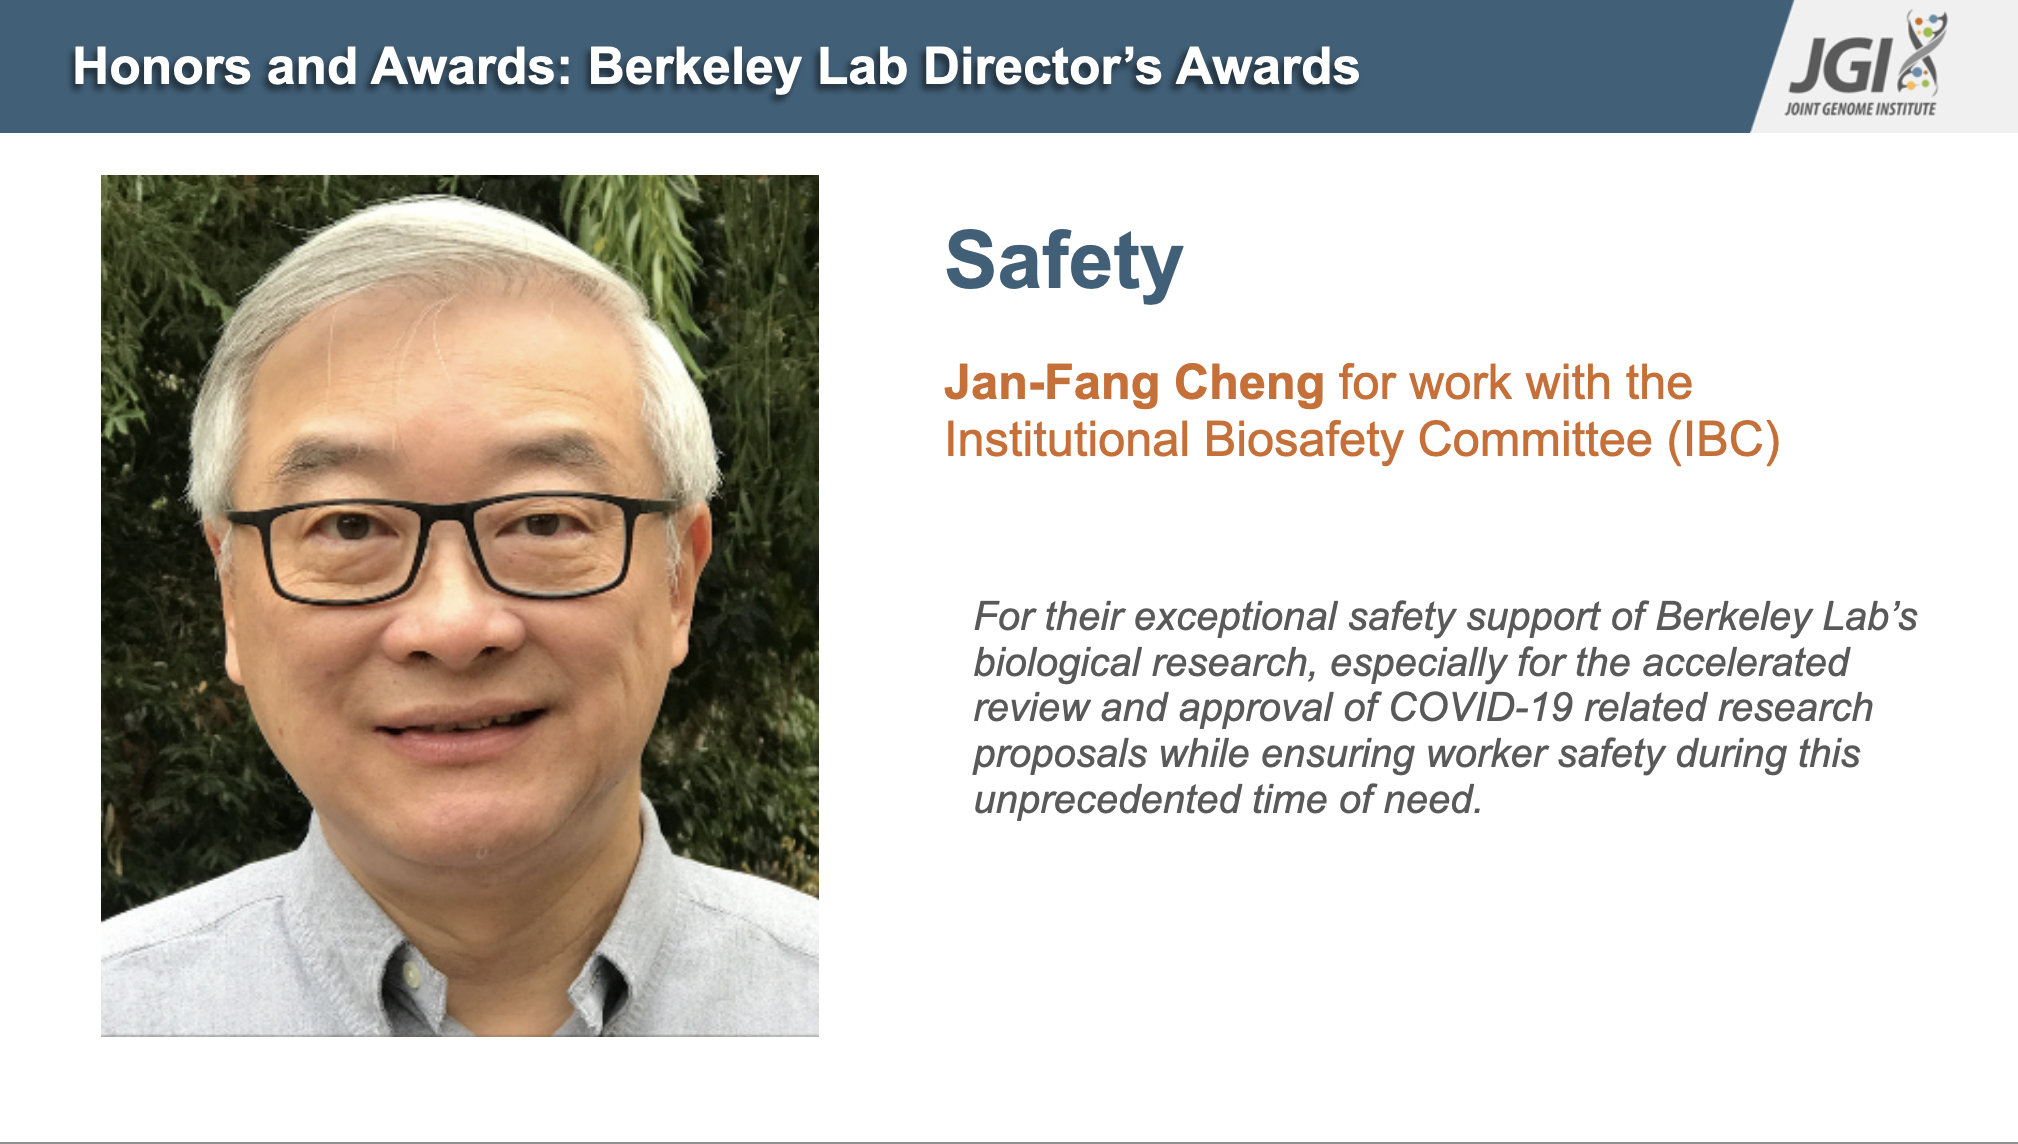 A photo of Jan-Fang Cheng, a recipient of the Berkeley Lab Director's Award for Safety for his work with the Institutional Biosafety Committee